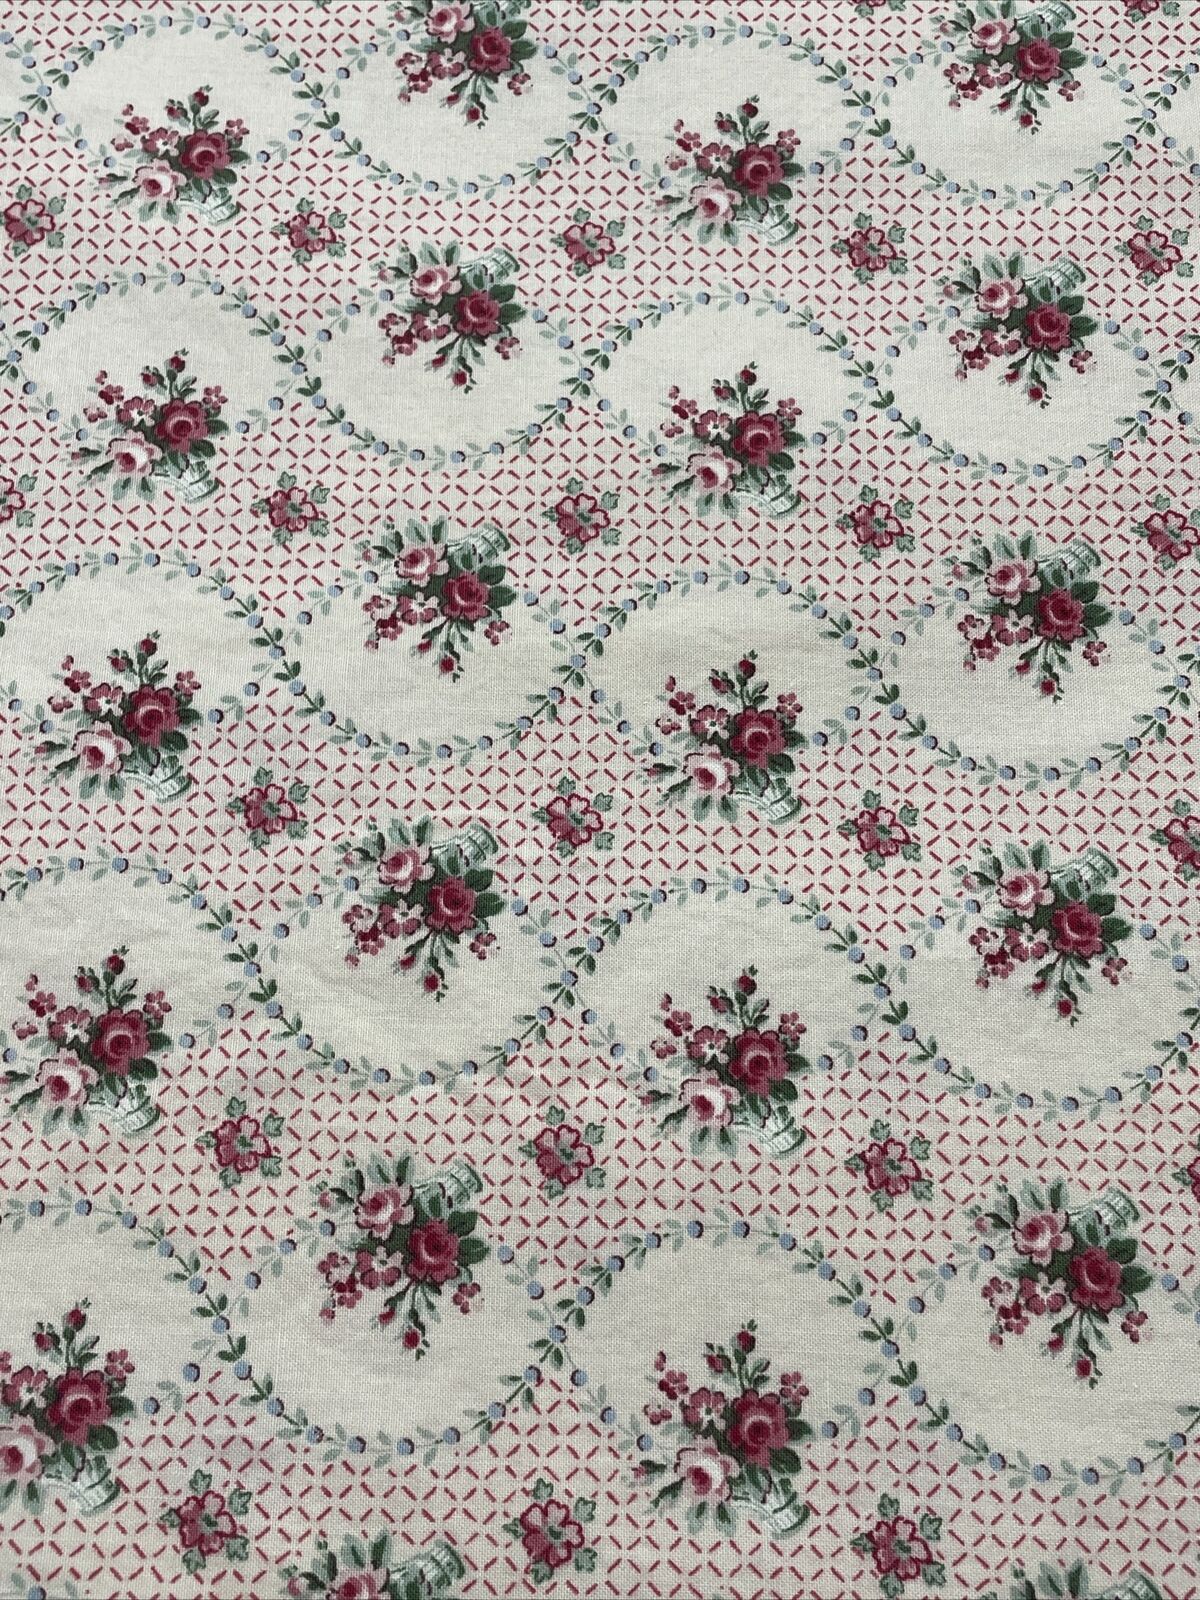 Vintage Laura Ashley English Country Floral Fabric 1 Yard 27” 54” Wide